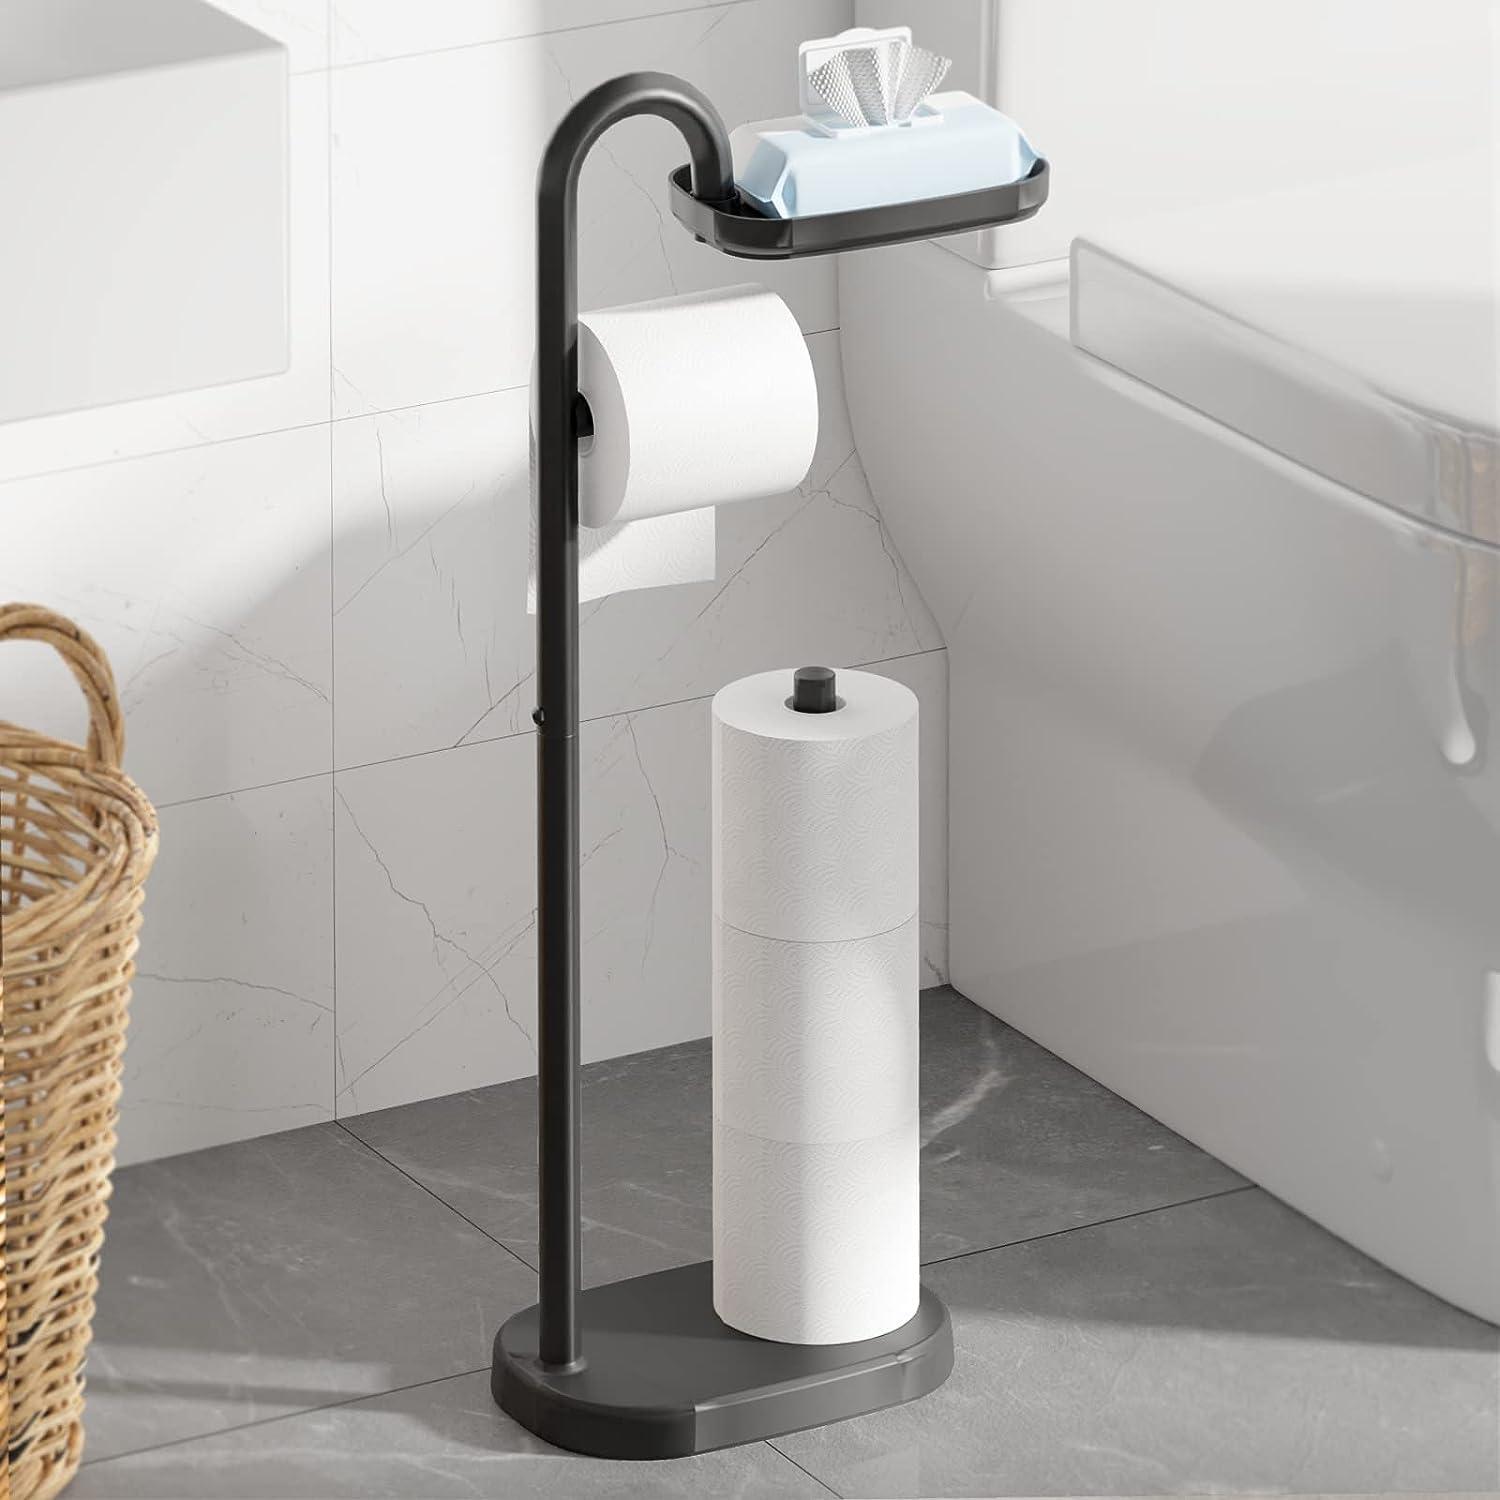 Kitsure Toilet Paper Holder Stand - Free-Standing Toilet Paper